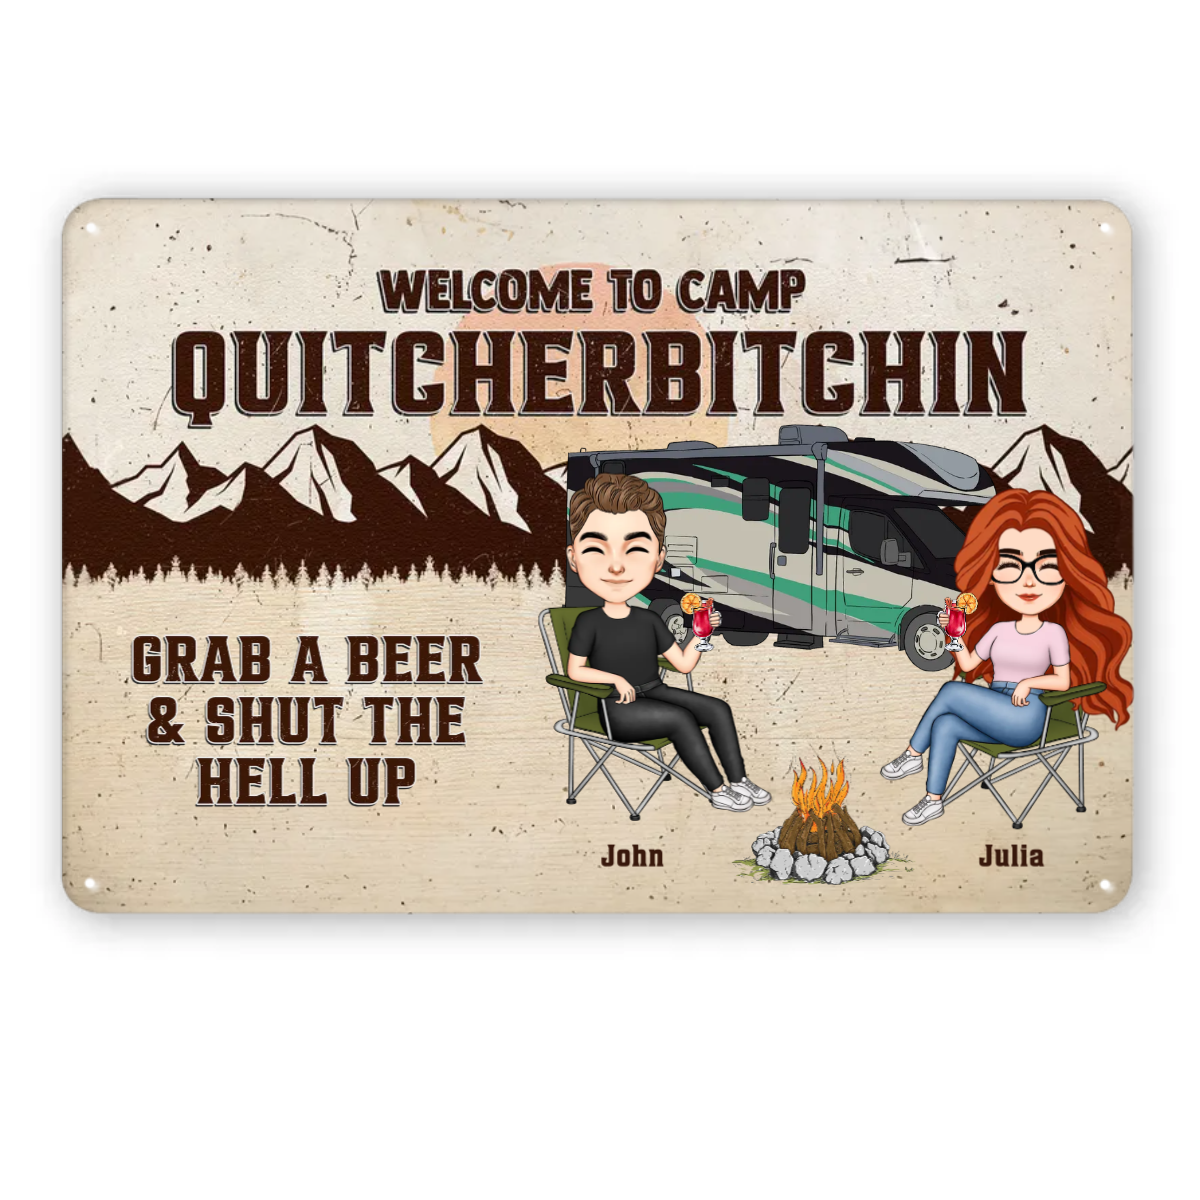 Welcome To Camp Quitcherbitchins Couples With Beer - Personalized Custom Metal Signs